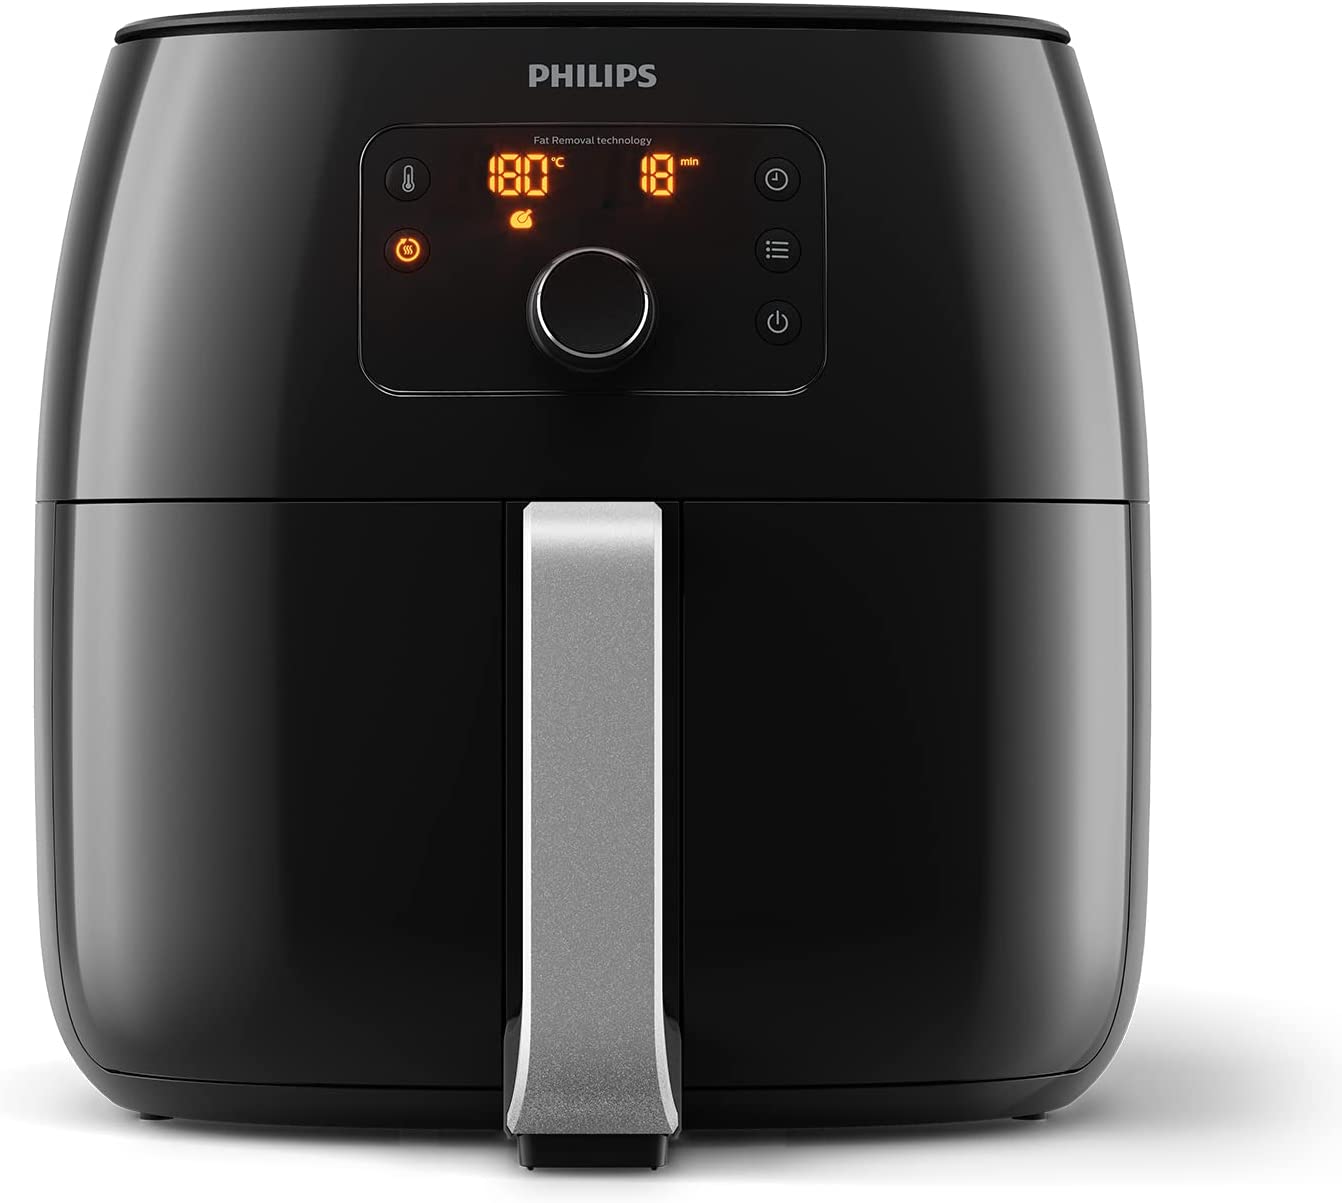 Philips Domestic Appliances Philips Premium Airfryer XXL - 7.3 L, Fryer without Oil, Rapid Air and Fat Removal Technology, NutriU App with Recipes (HD9650/90)